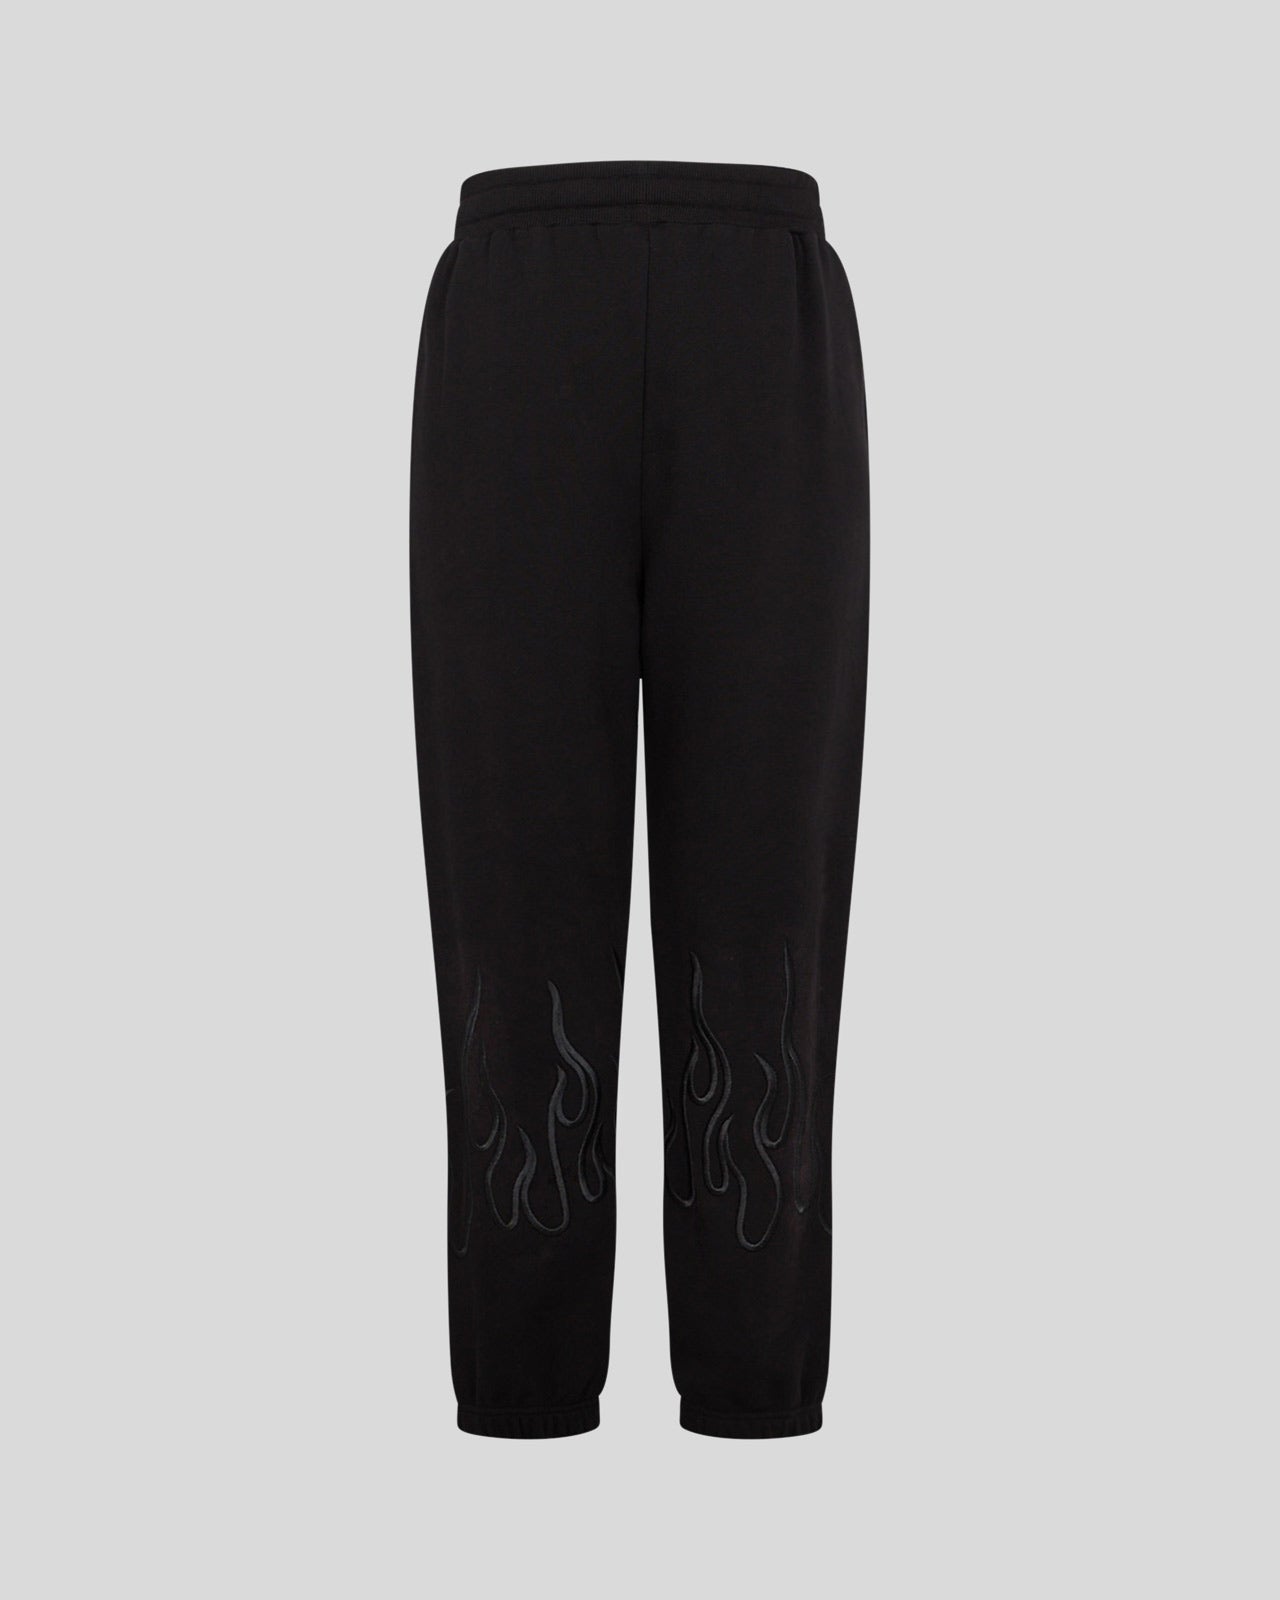 BLACK PANTS WITH BLACK EMBROIDERED FLAMES